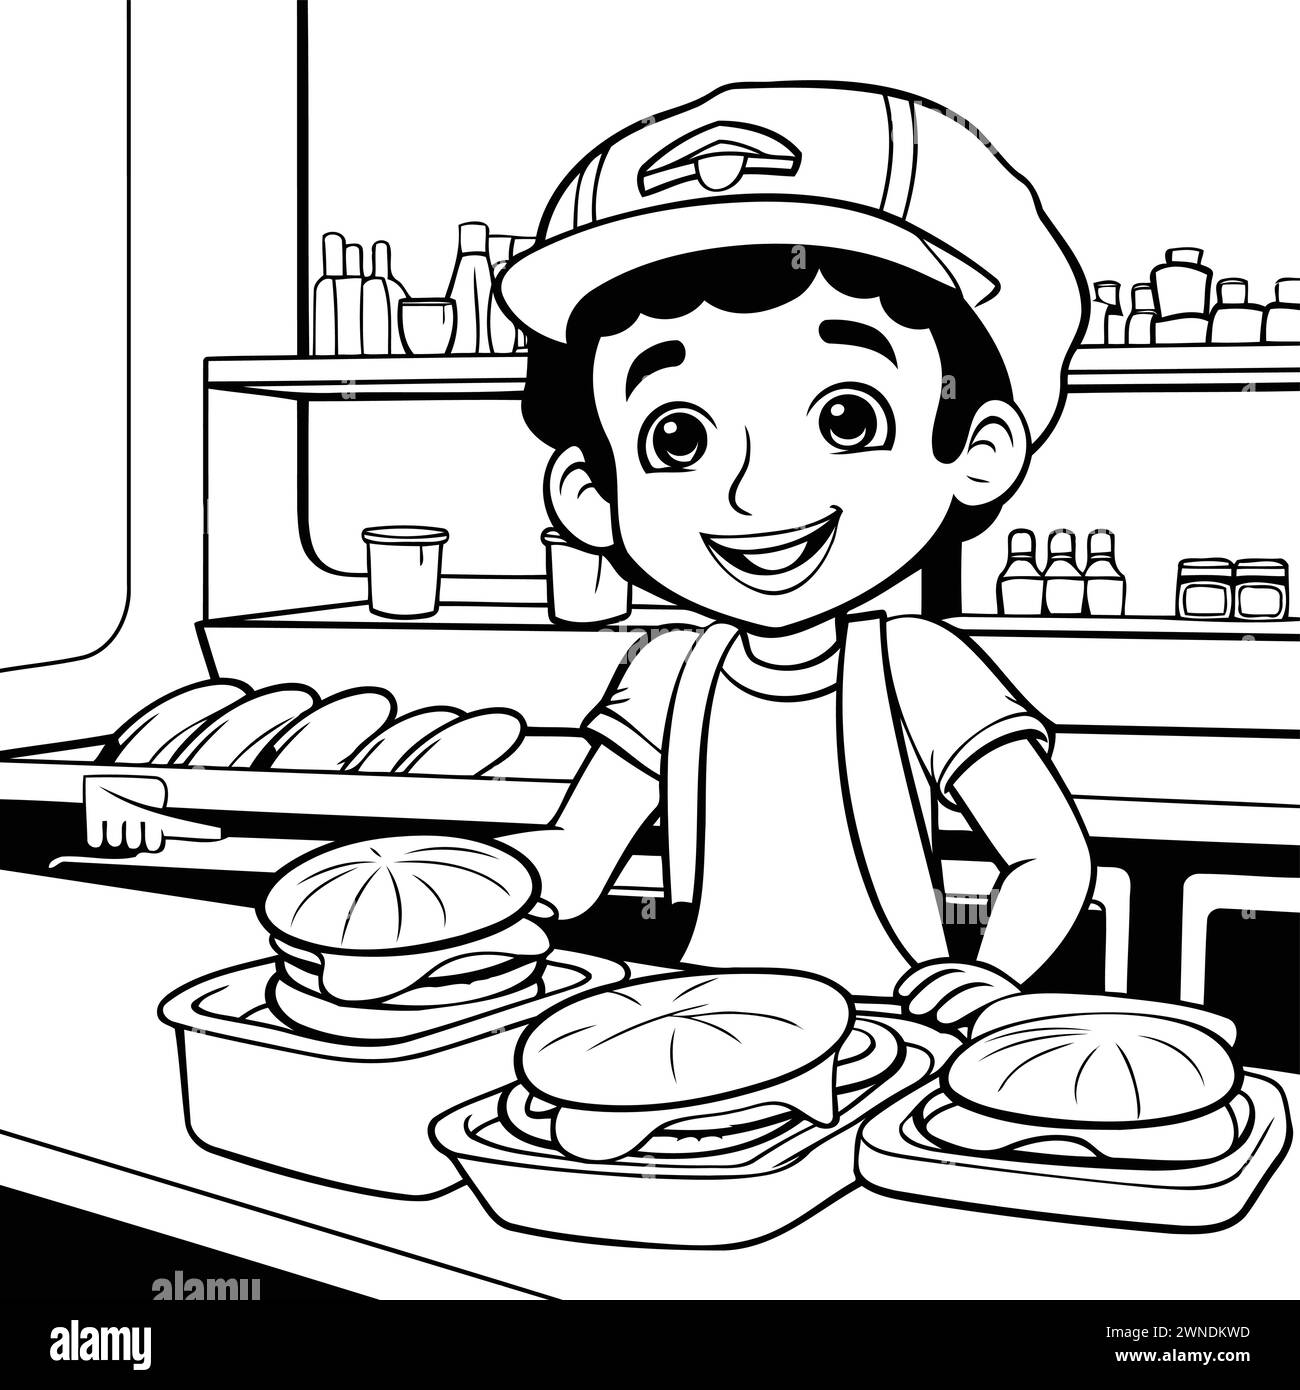 Boy cooking food in the kitchen black and white vector illustration graphic design Stock Vector